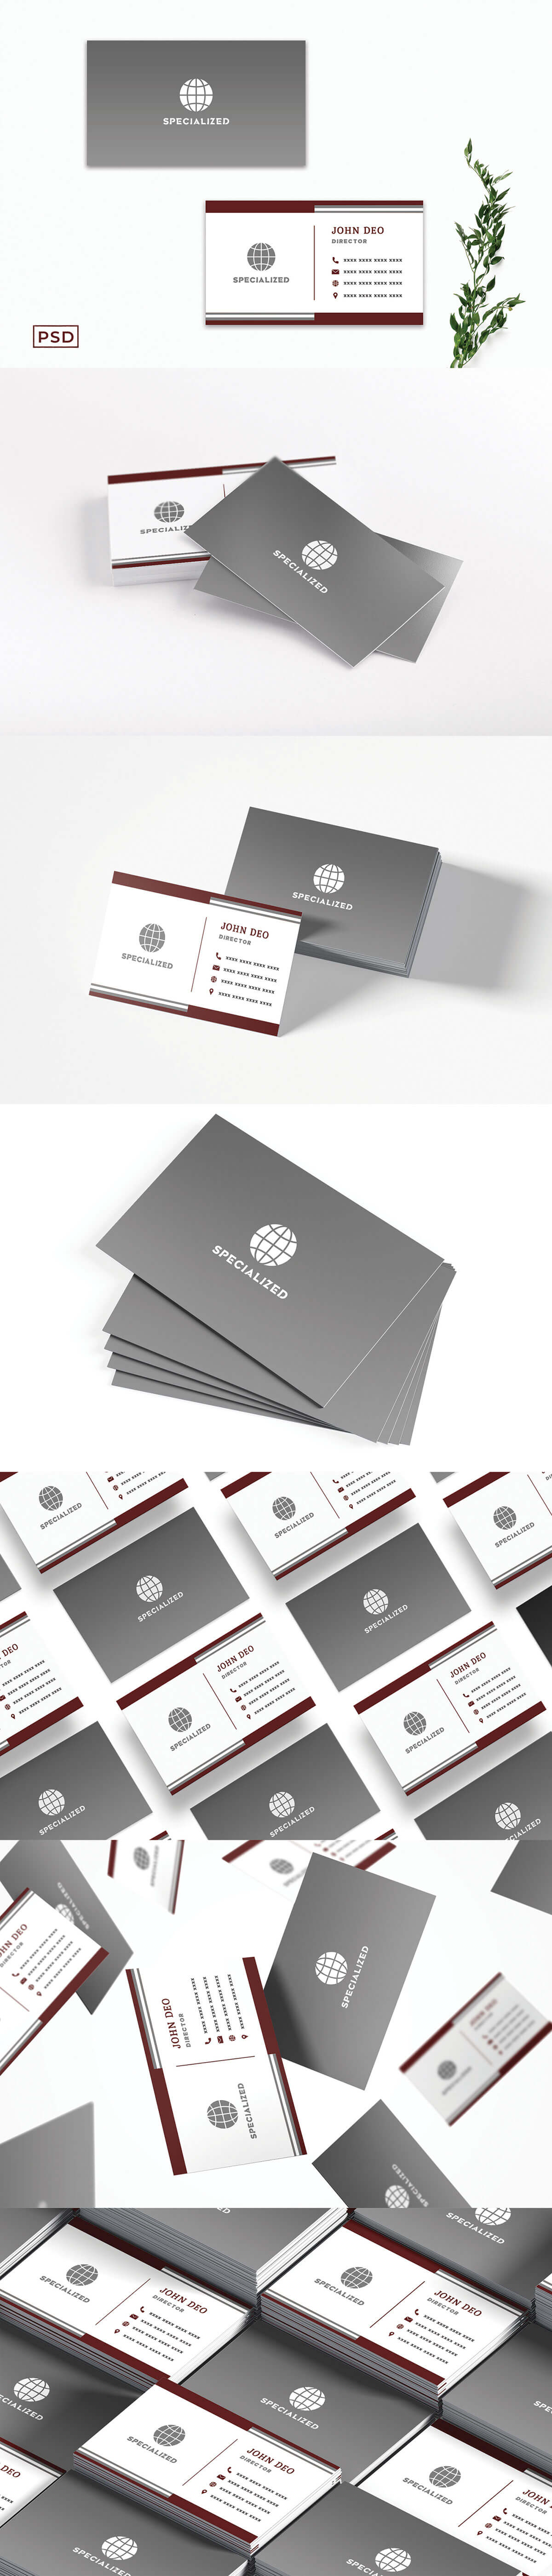 Free Grey & White Minimal Business Card Template